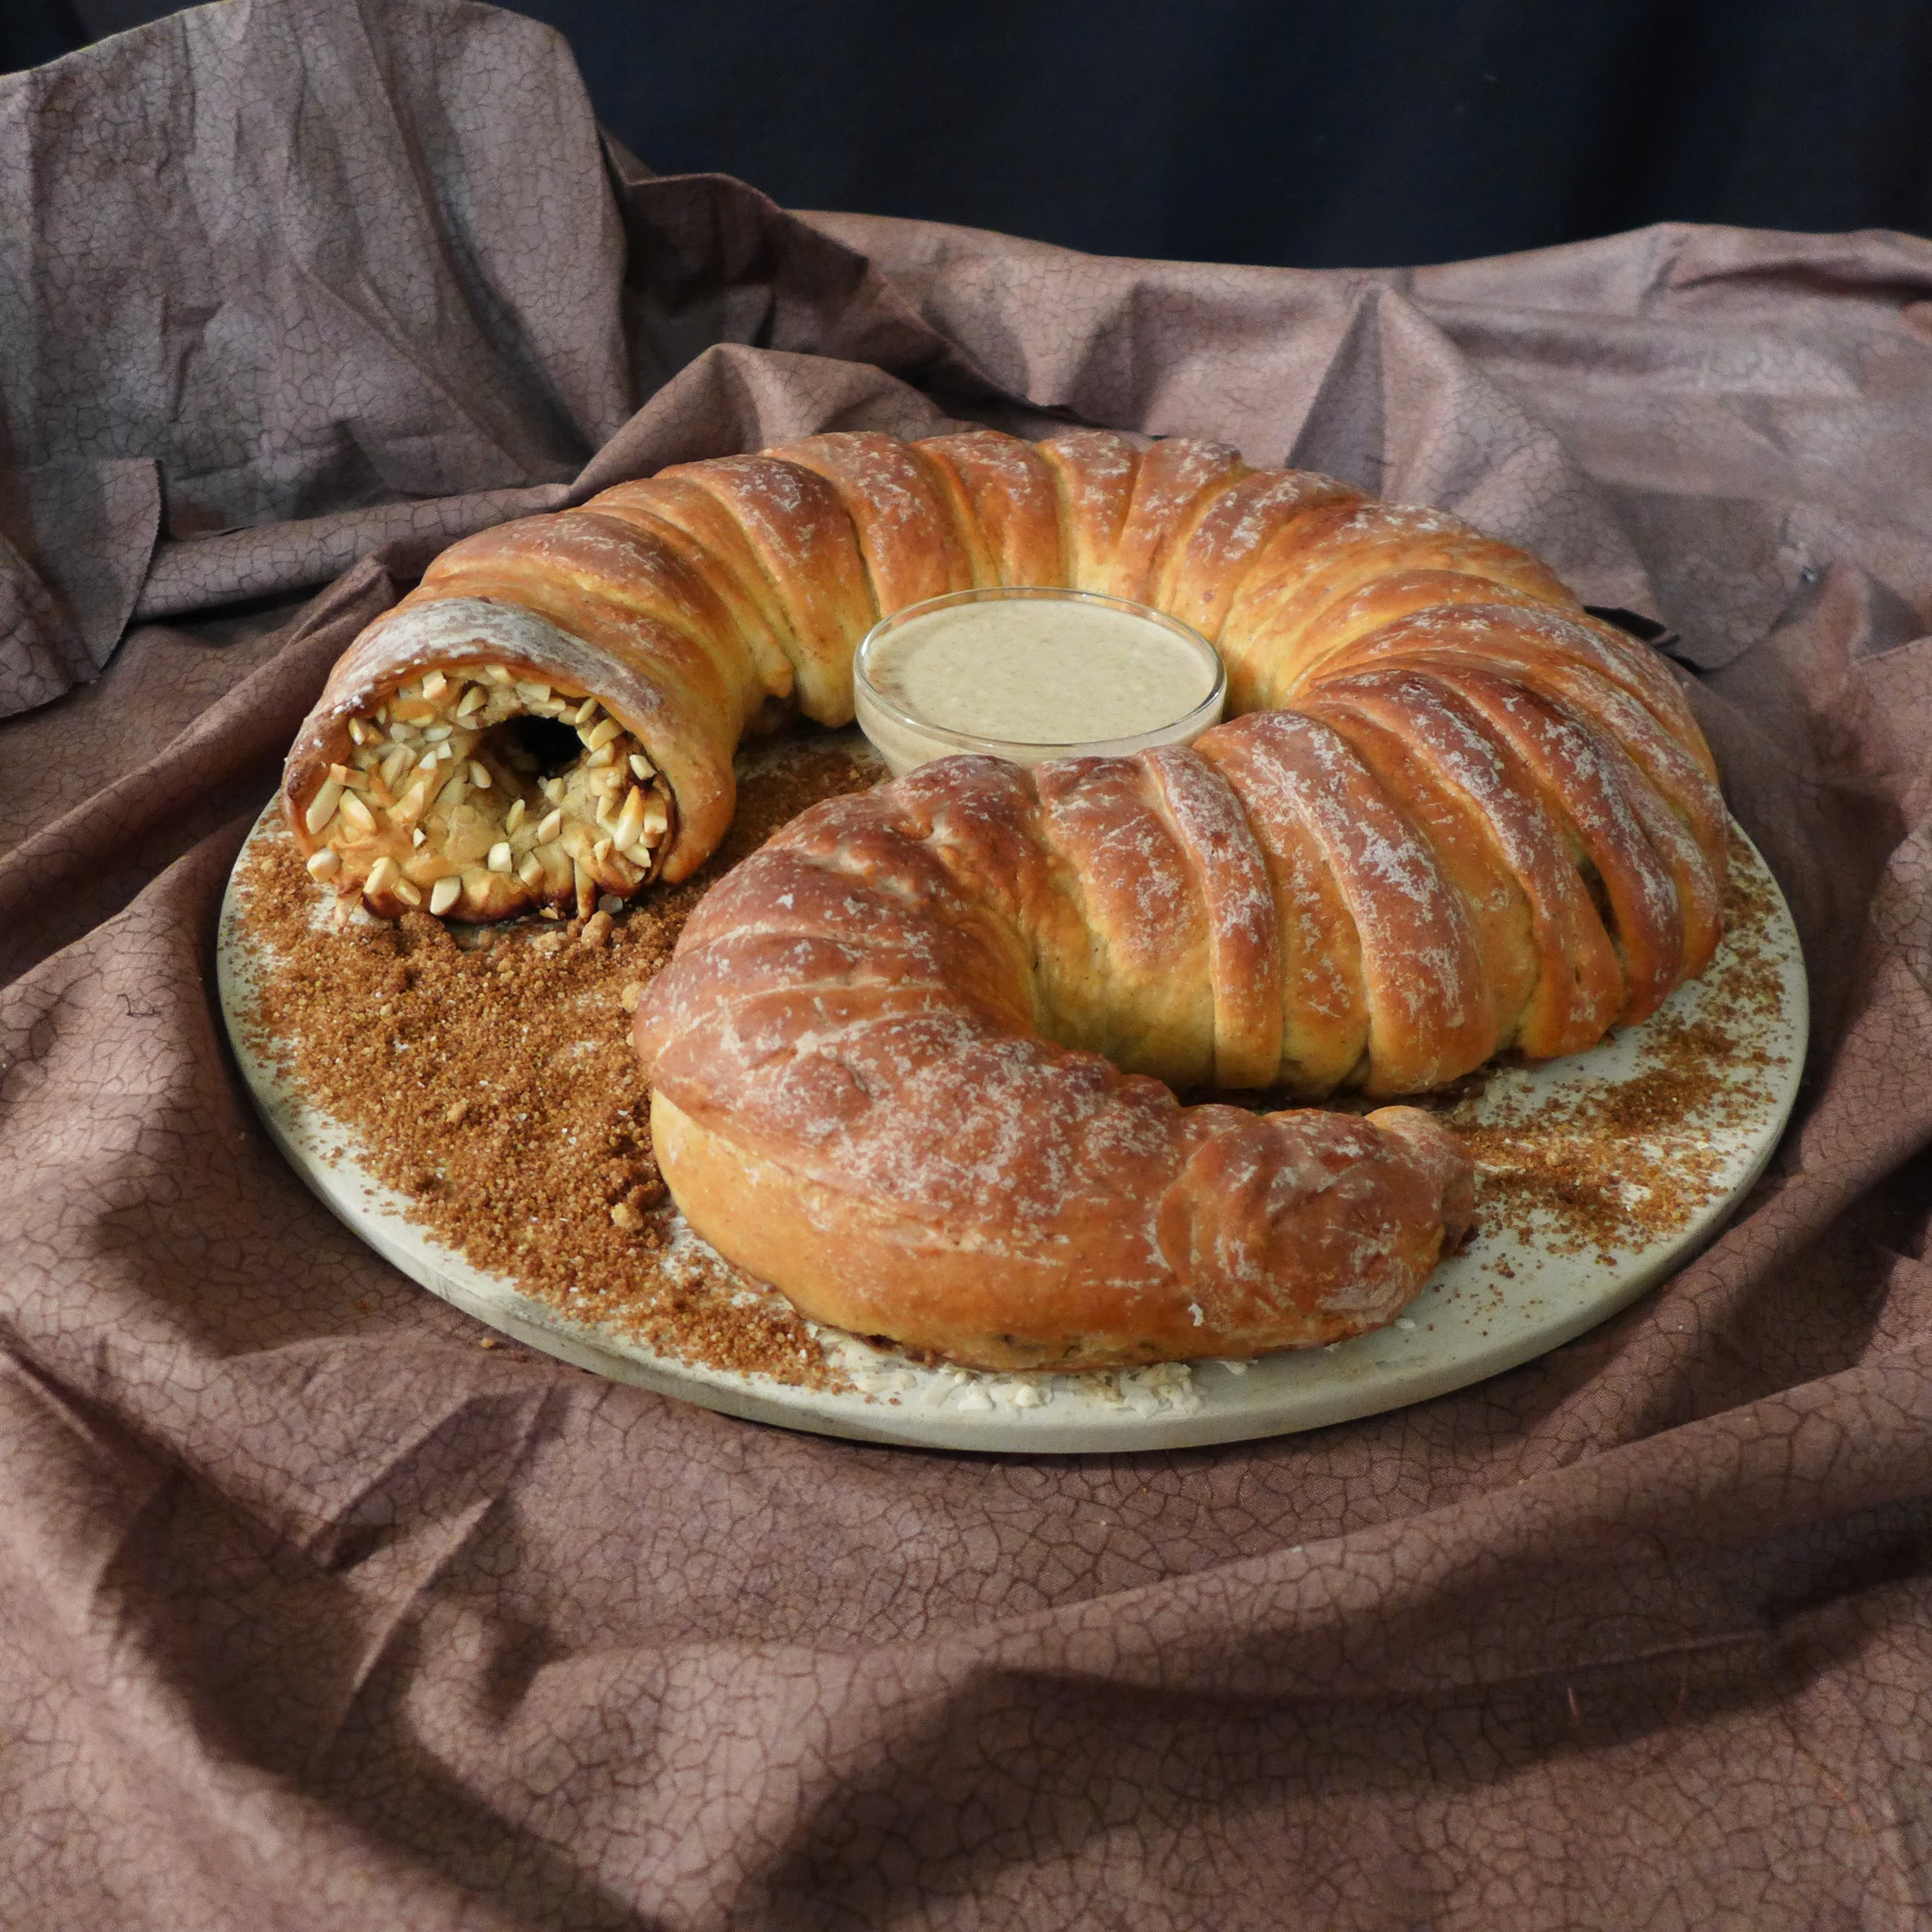 dune-week-spice-stuffed-sandworm-bread-kitchen-overlord-your-home